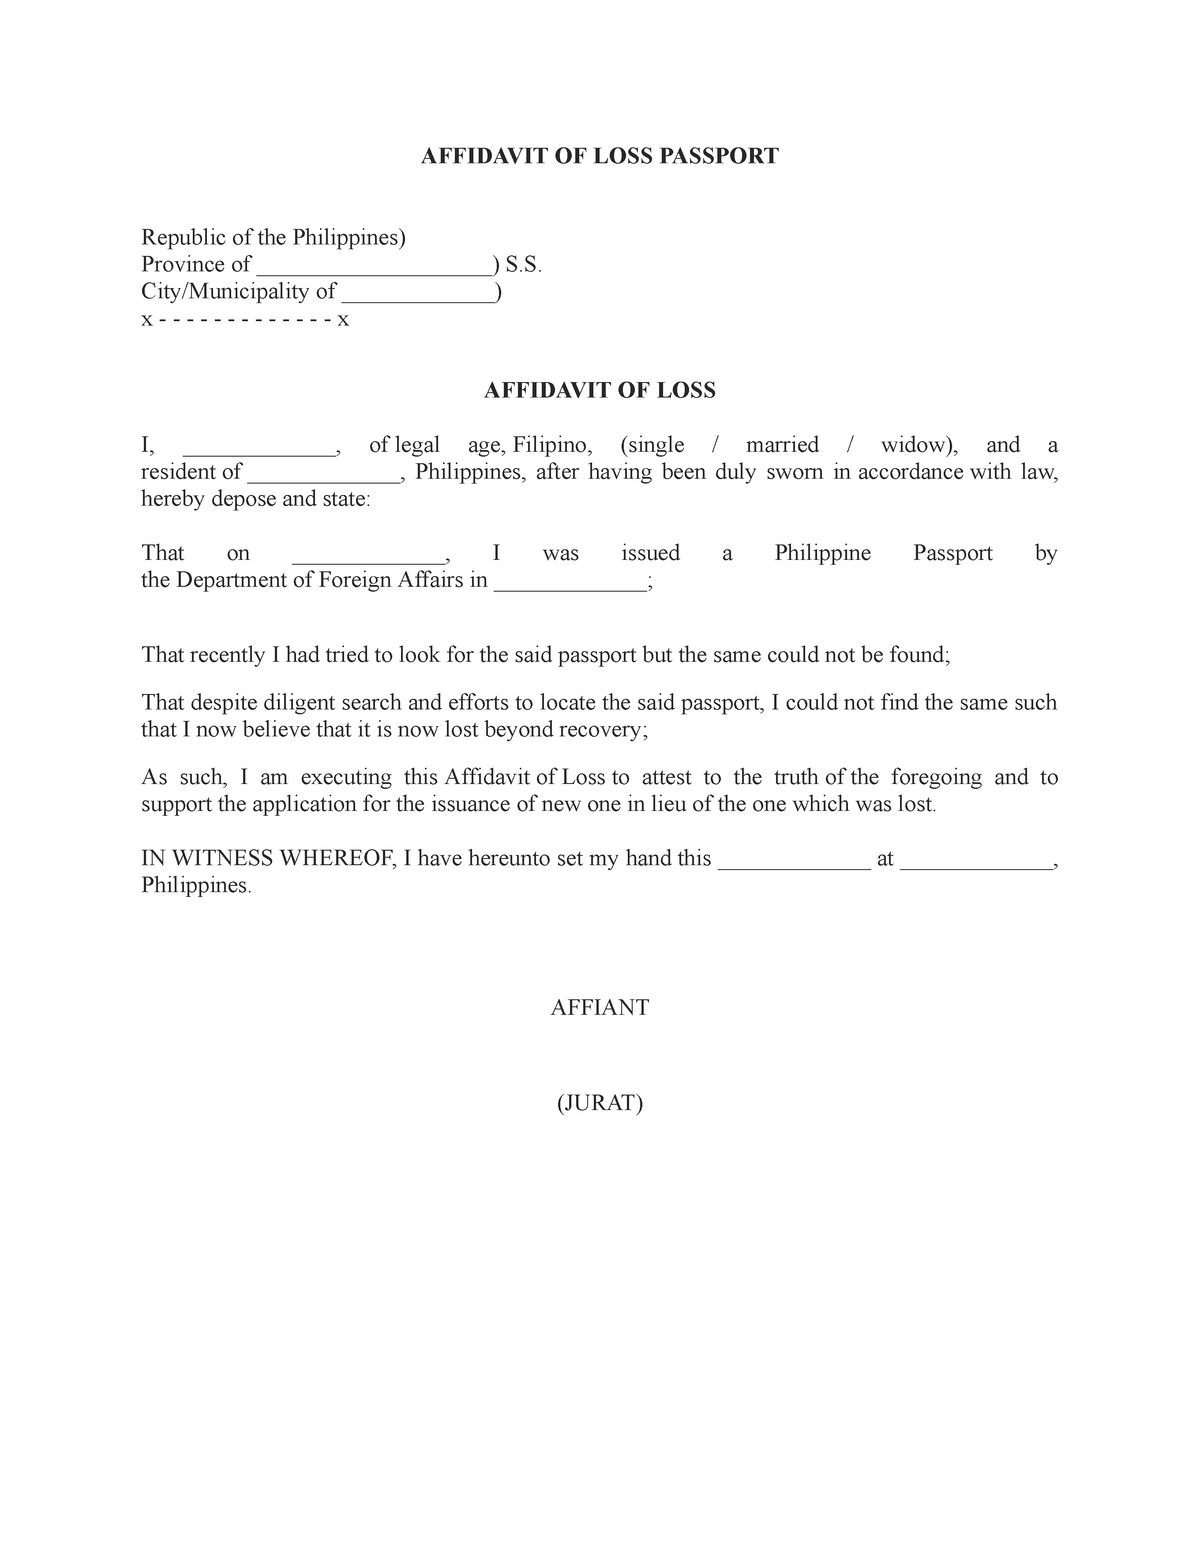 Affidavit Of Loss Loss Republic Of The Philippines City Of Davao Hot Sex Picture 5431